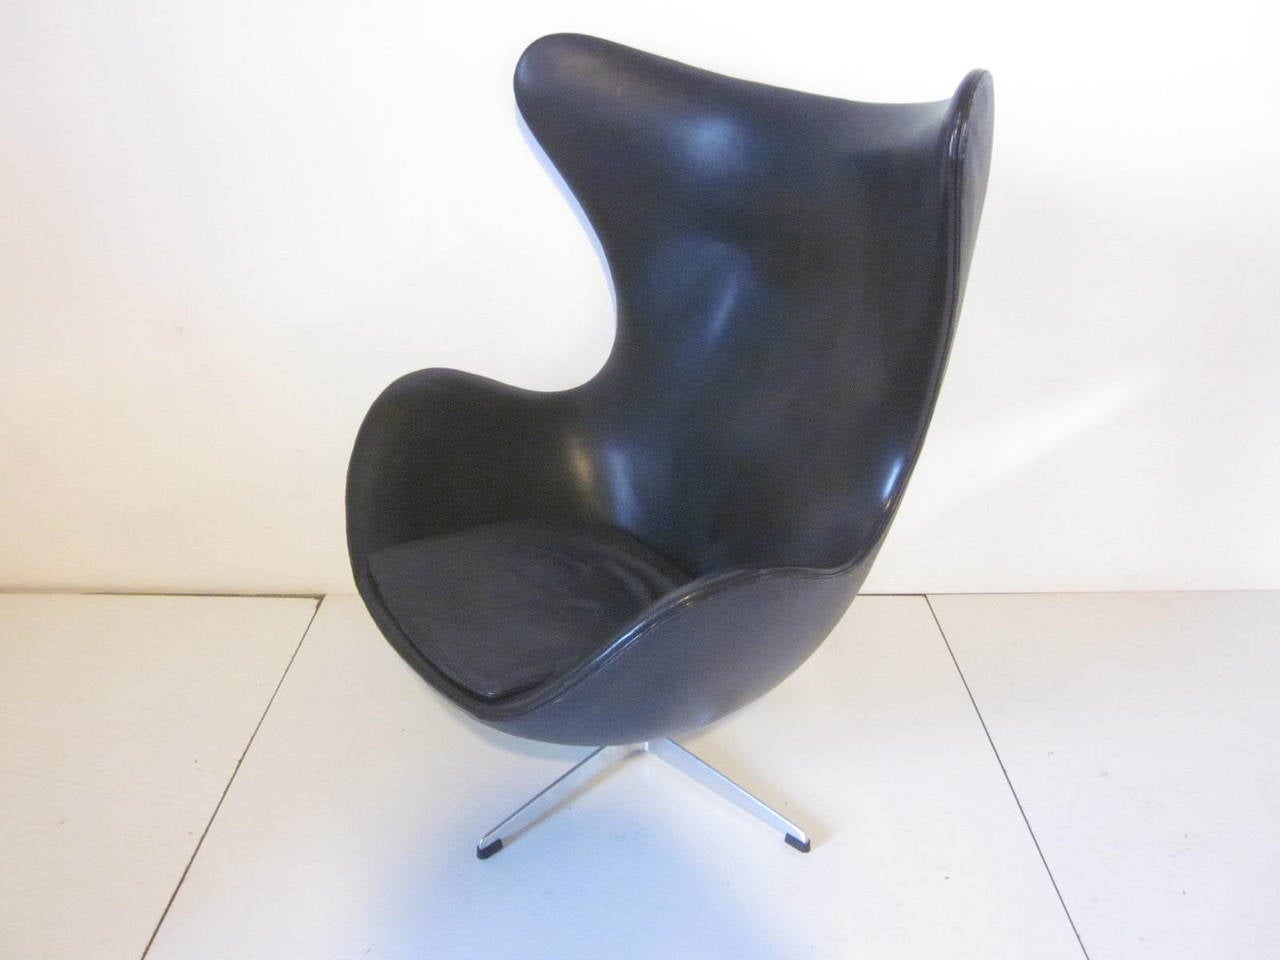 A black leather Jacobsen swiveling egg chair with aluminum base with rubber foot pads, retains the factory labels manufactured by Fritz Hansen made in Denmark.